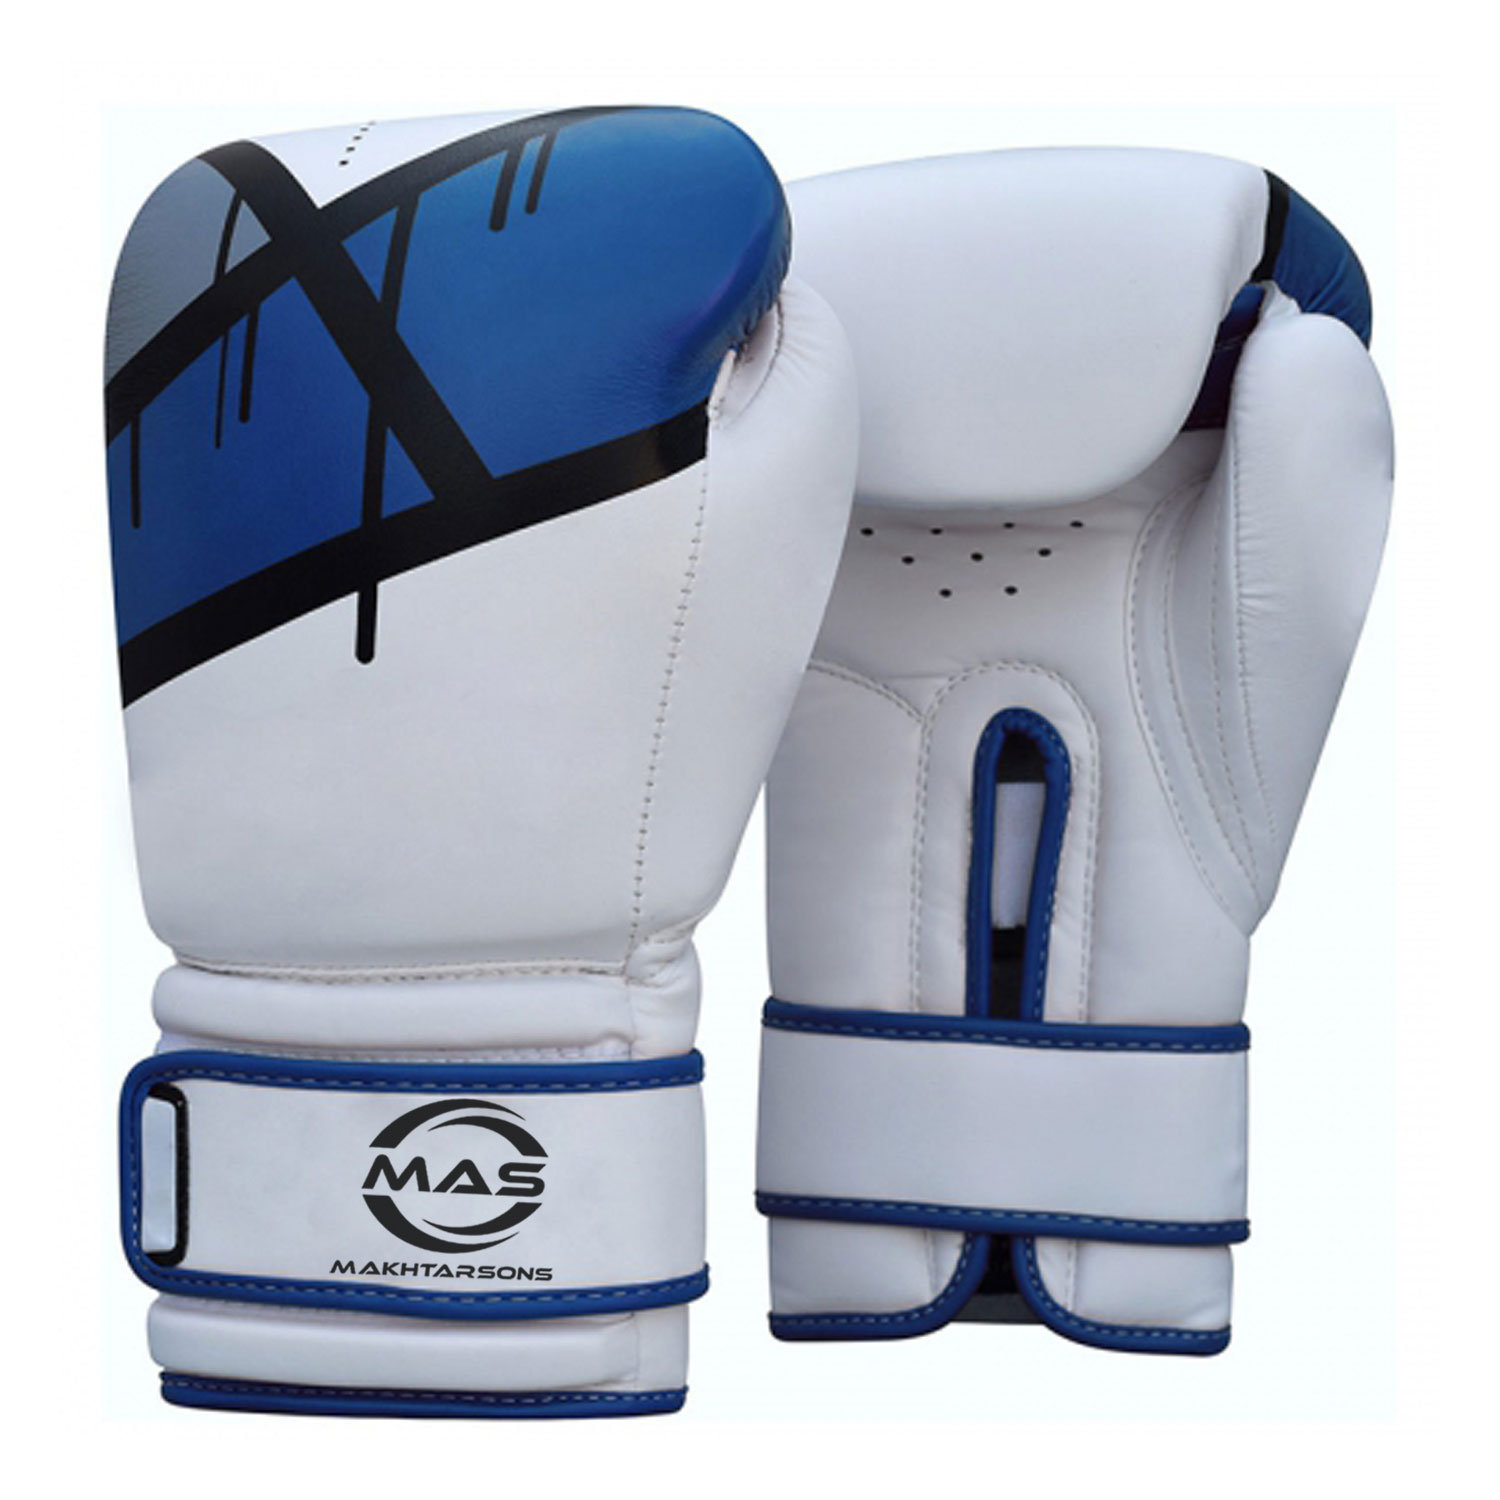 PROFESSIONAL BOXING GLOVES | MAS 202